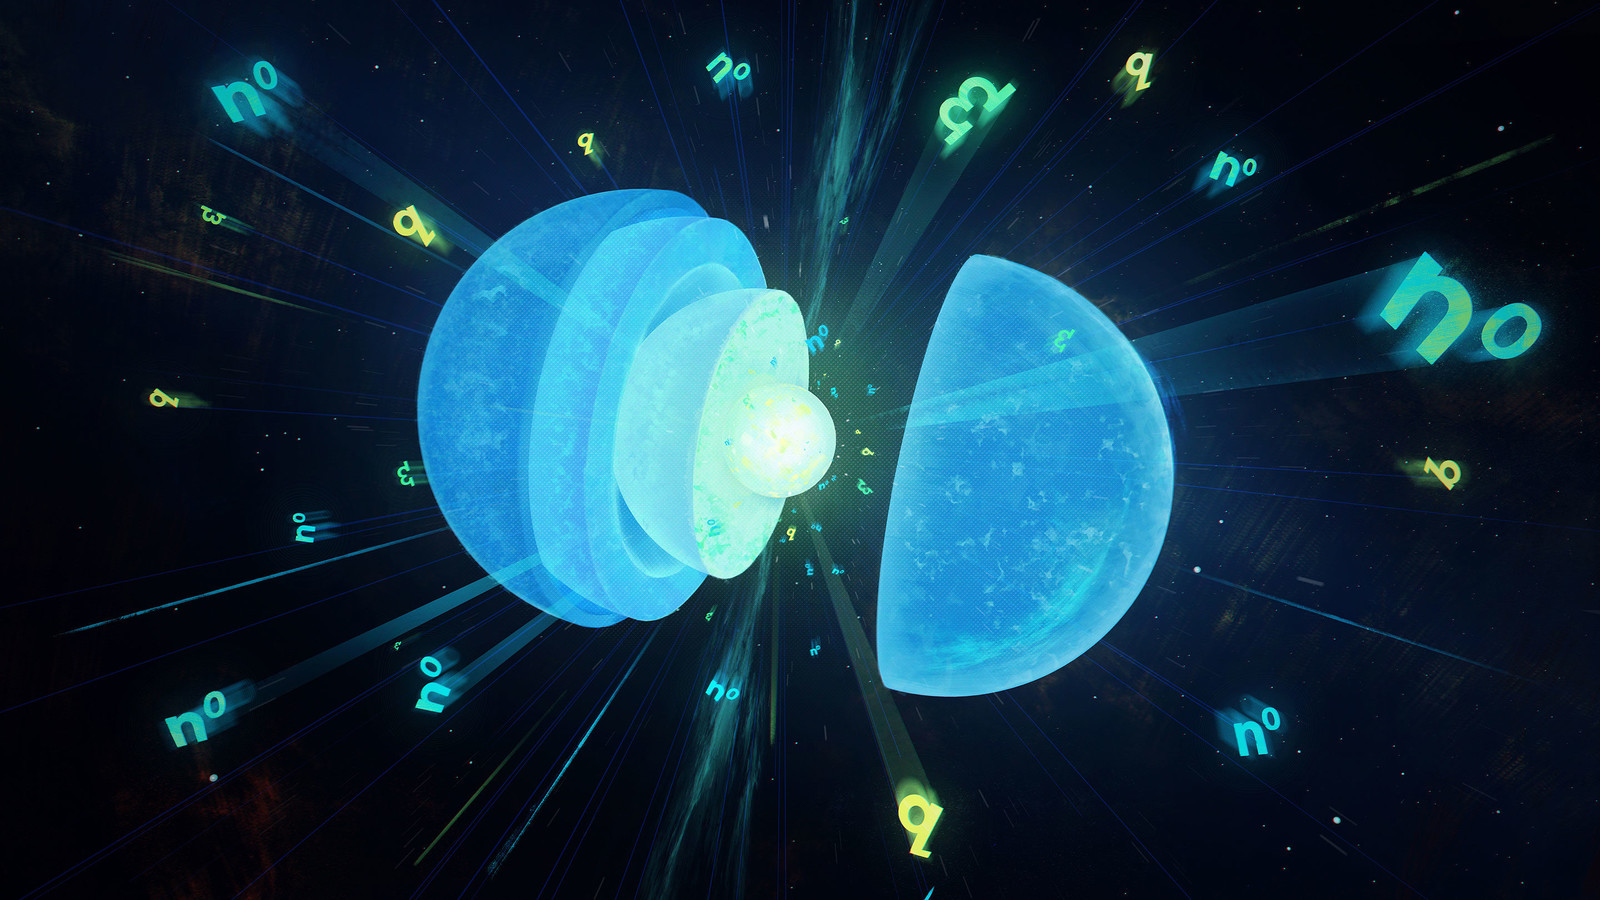 Squishy or Solid? A Neutron Star’s Insides Open to Debate